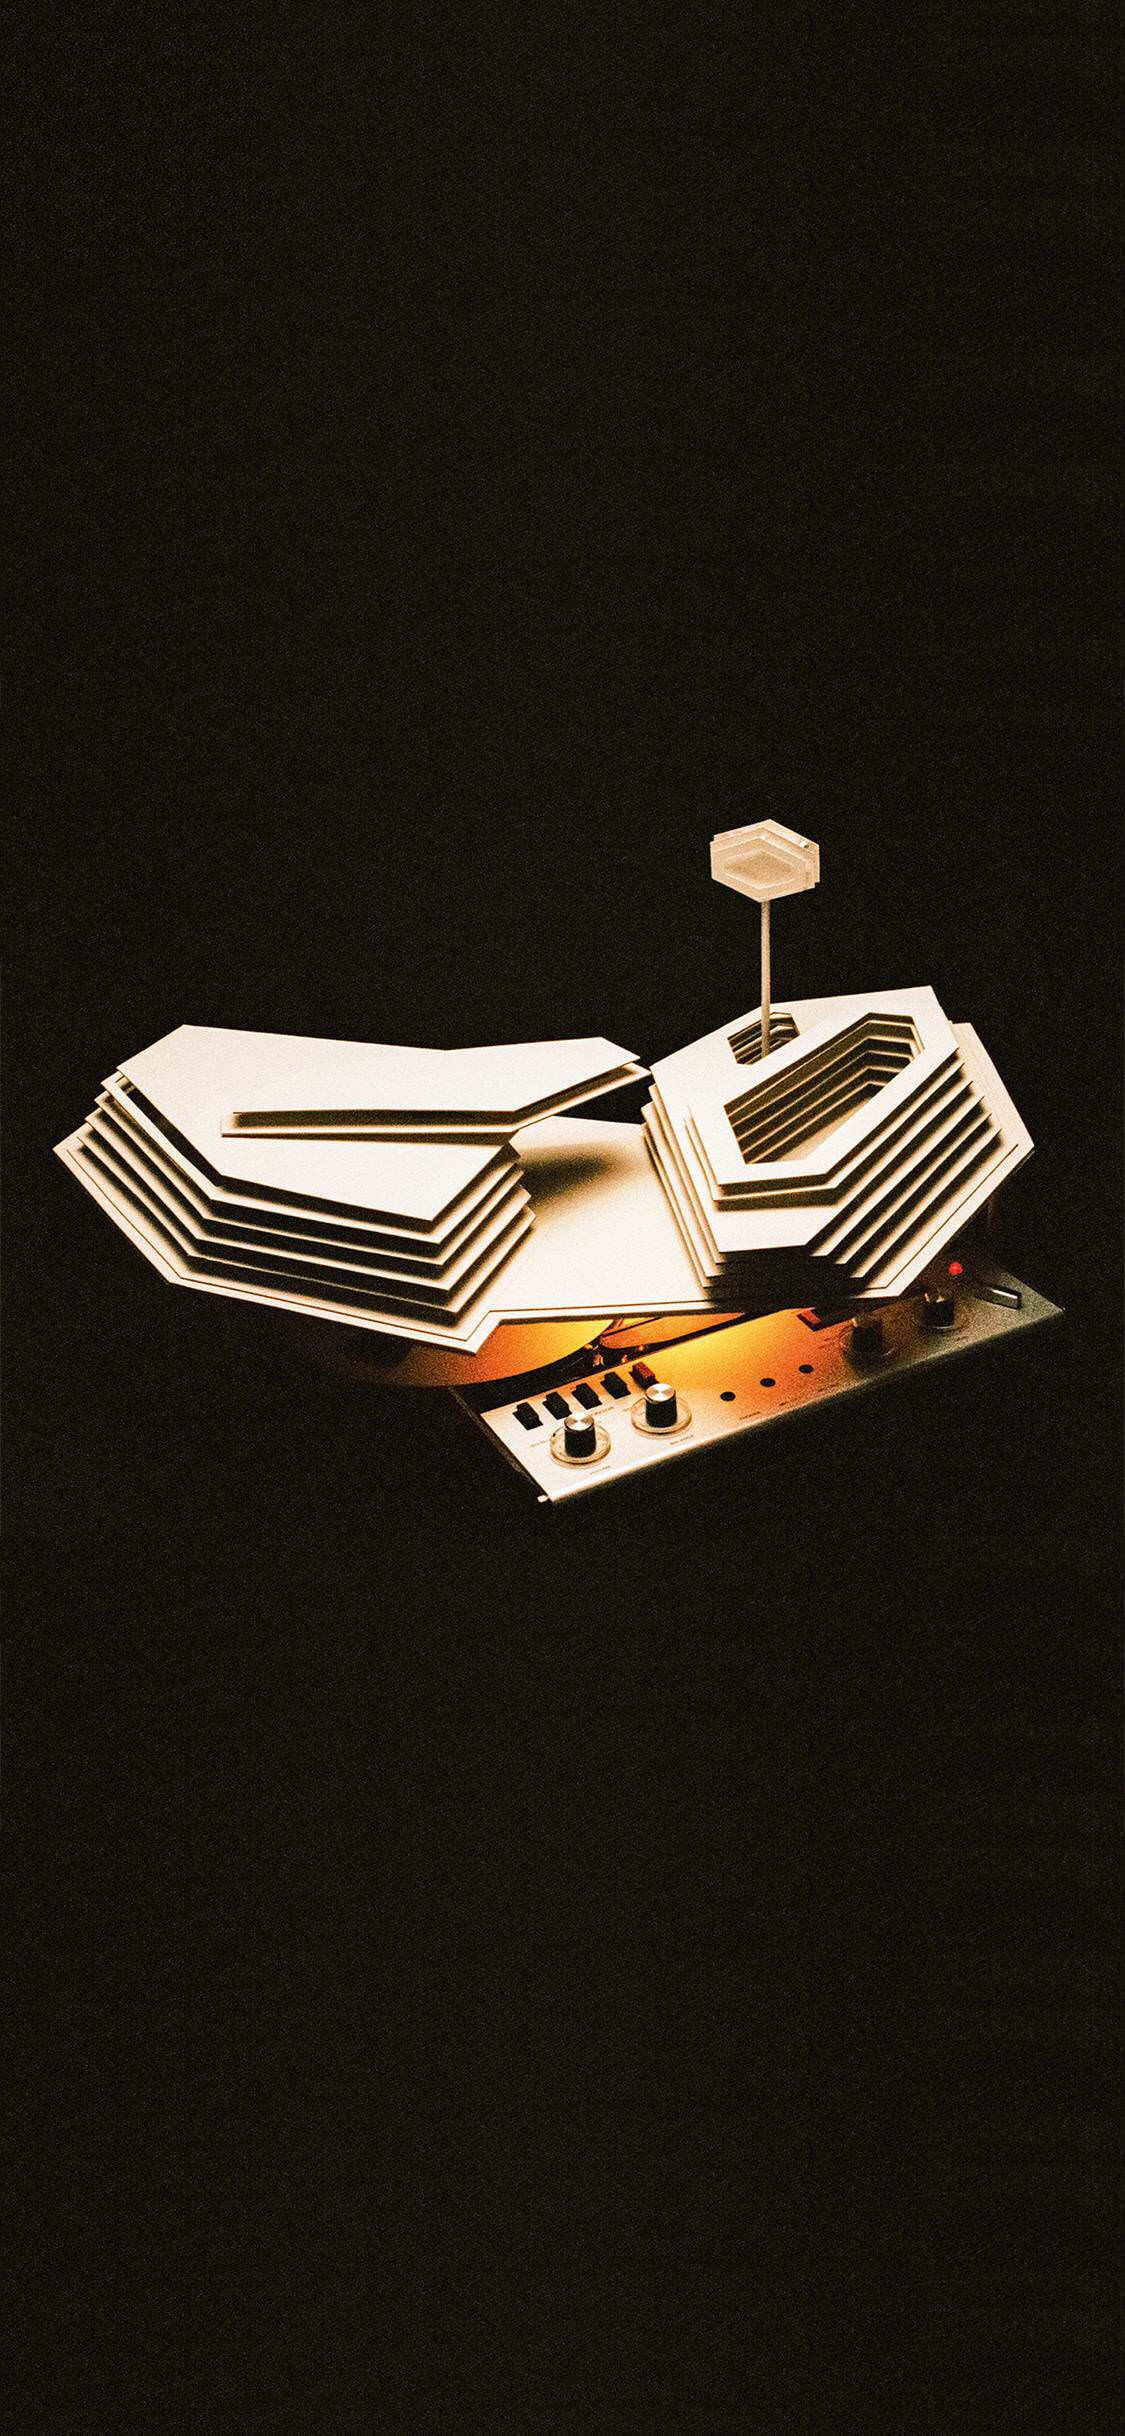 Tranquility Base Hotel + Casino high res phone wallpapers : arcticmonkeys